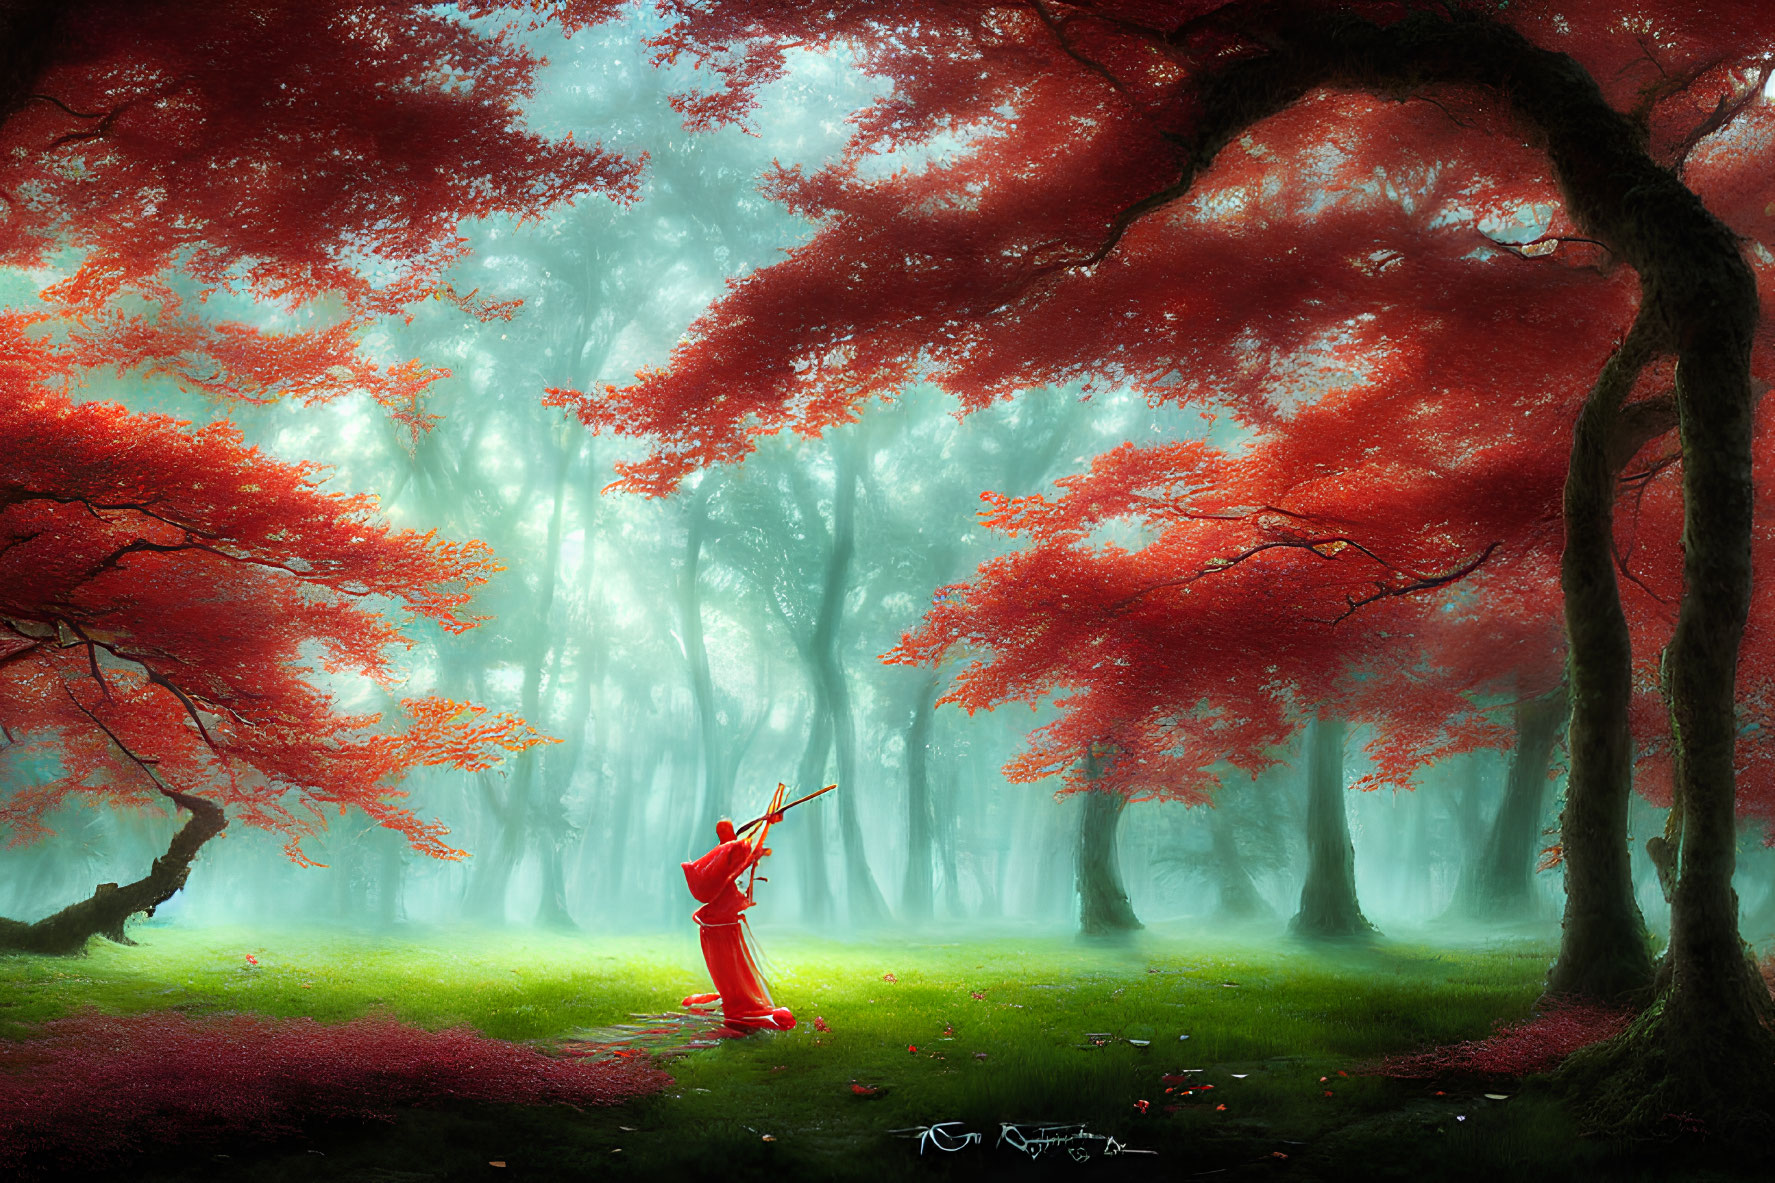 Person playing violin under vibrant red-leaved tree canopy